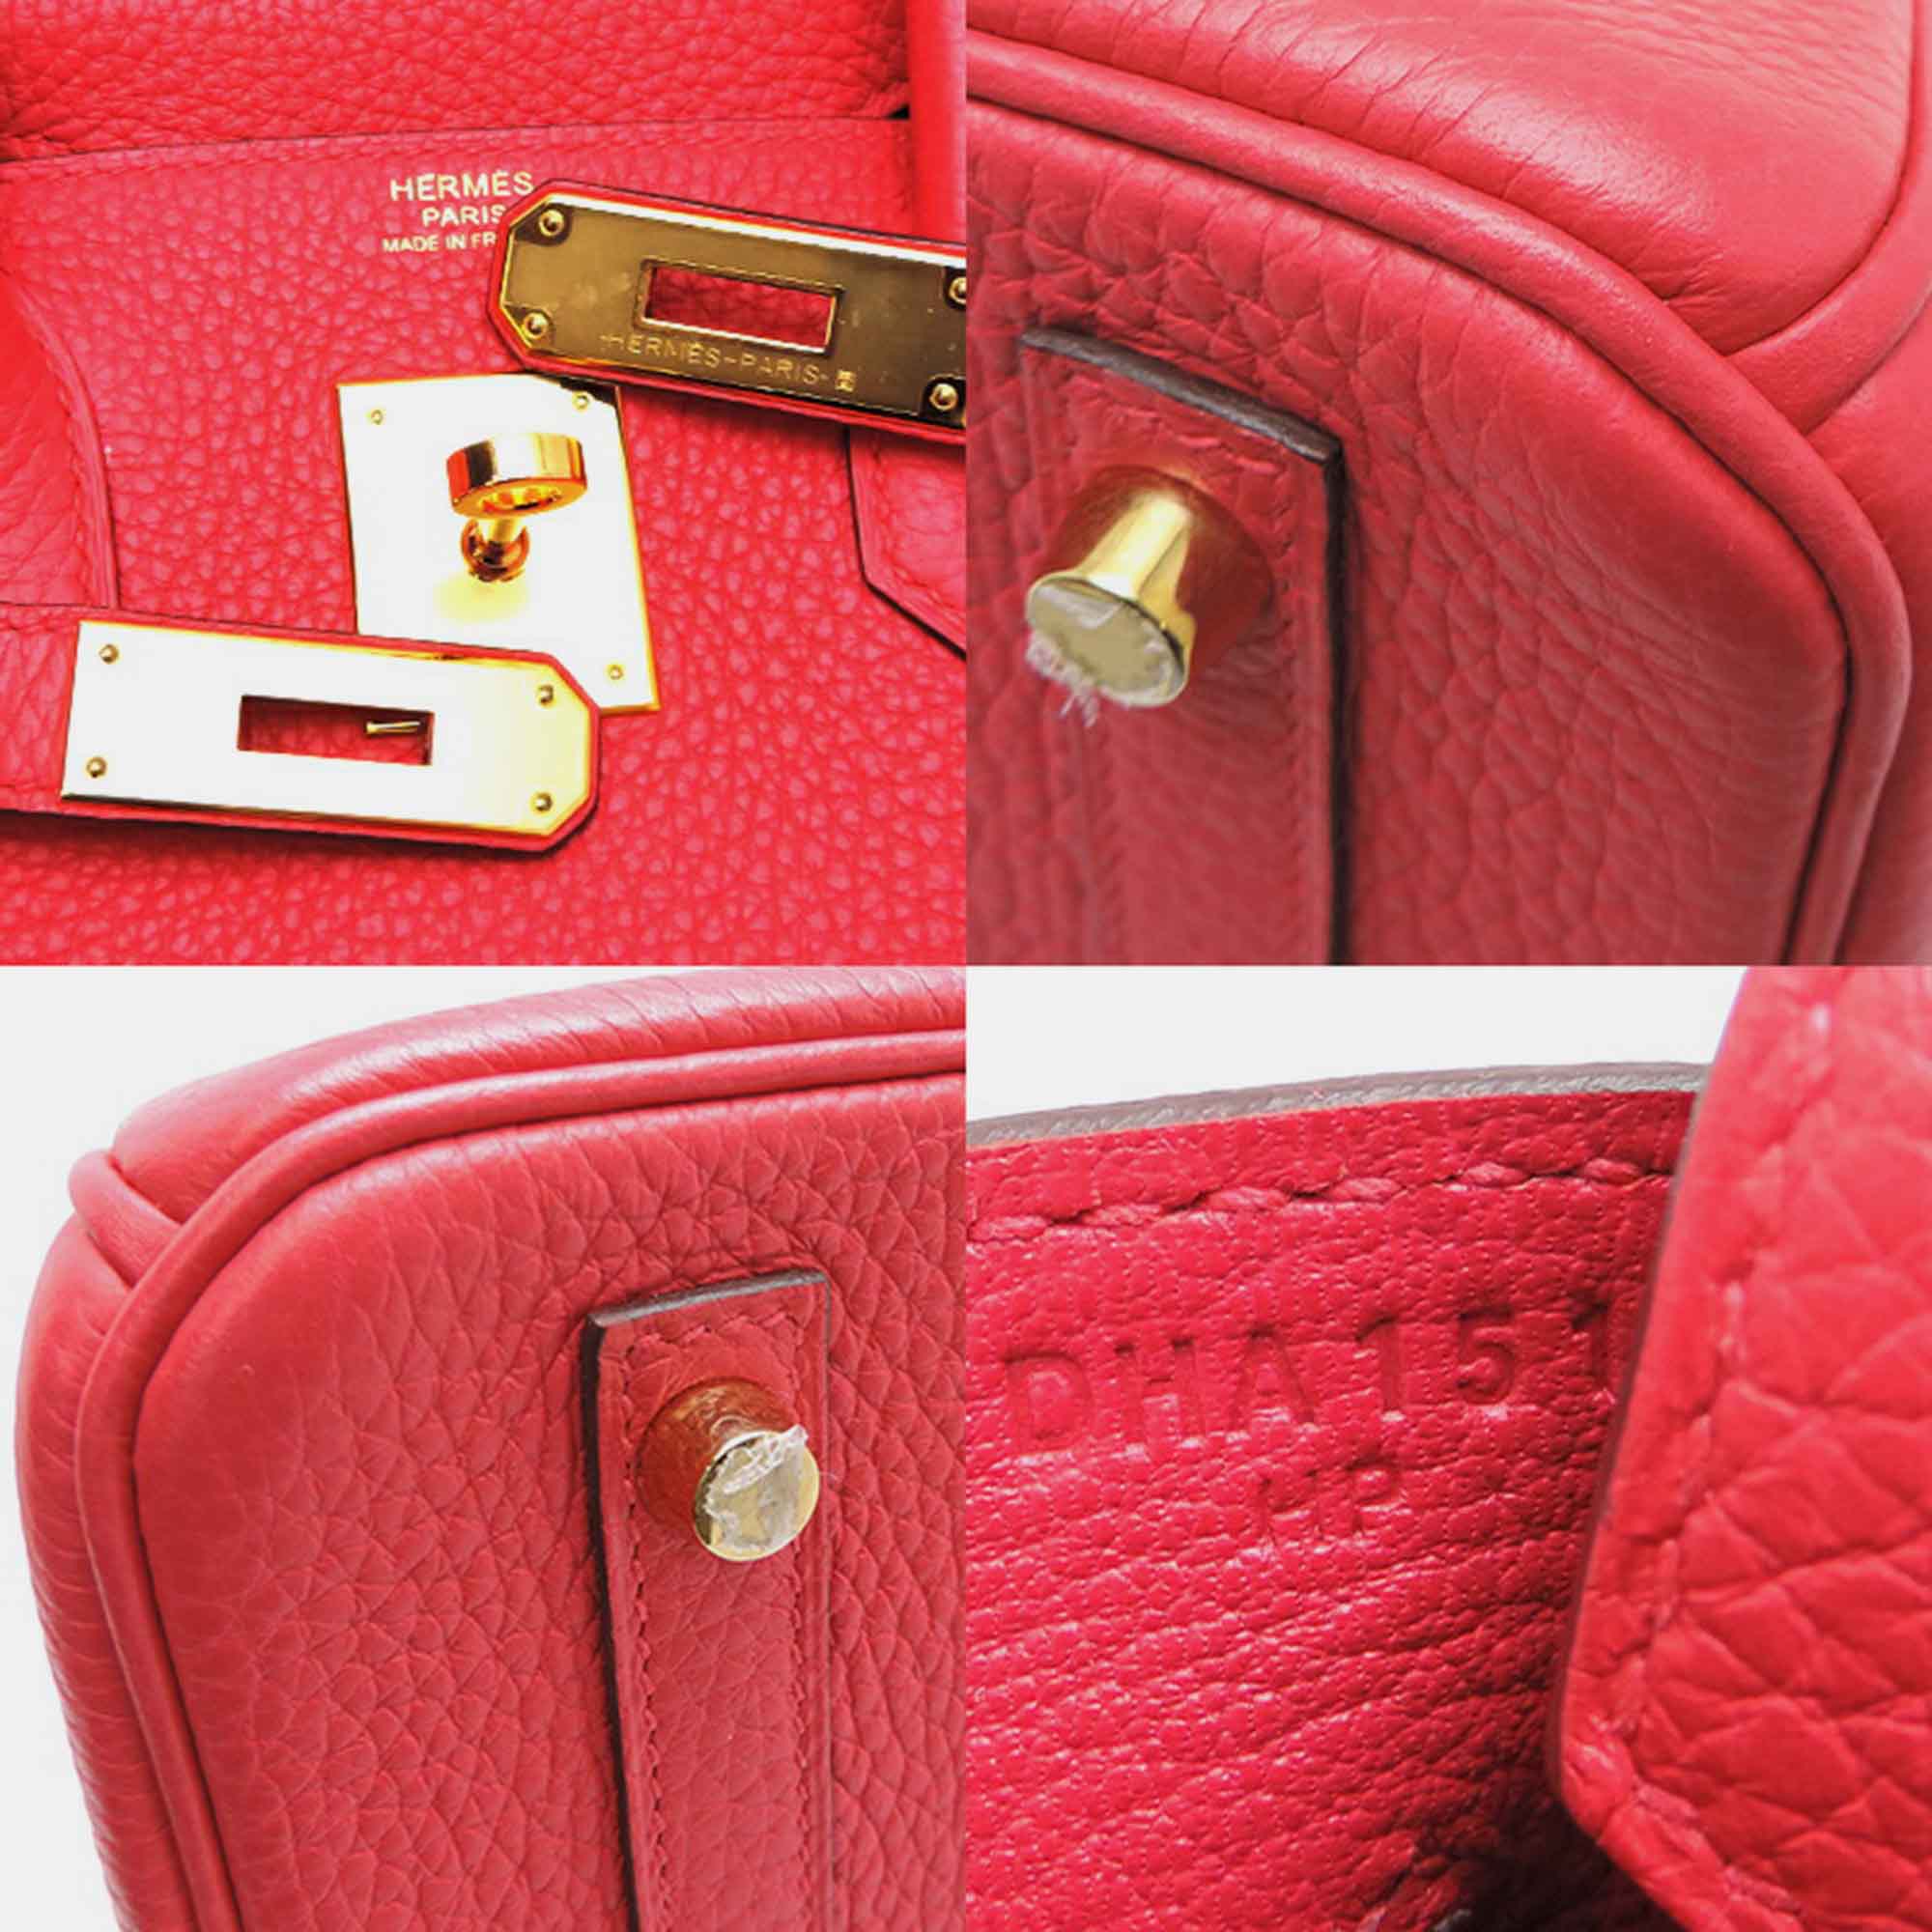 Hermes Pink Clemence Leather Gold Plated Hardware Birkin 30 Tote Bag